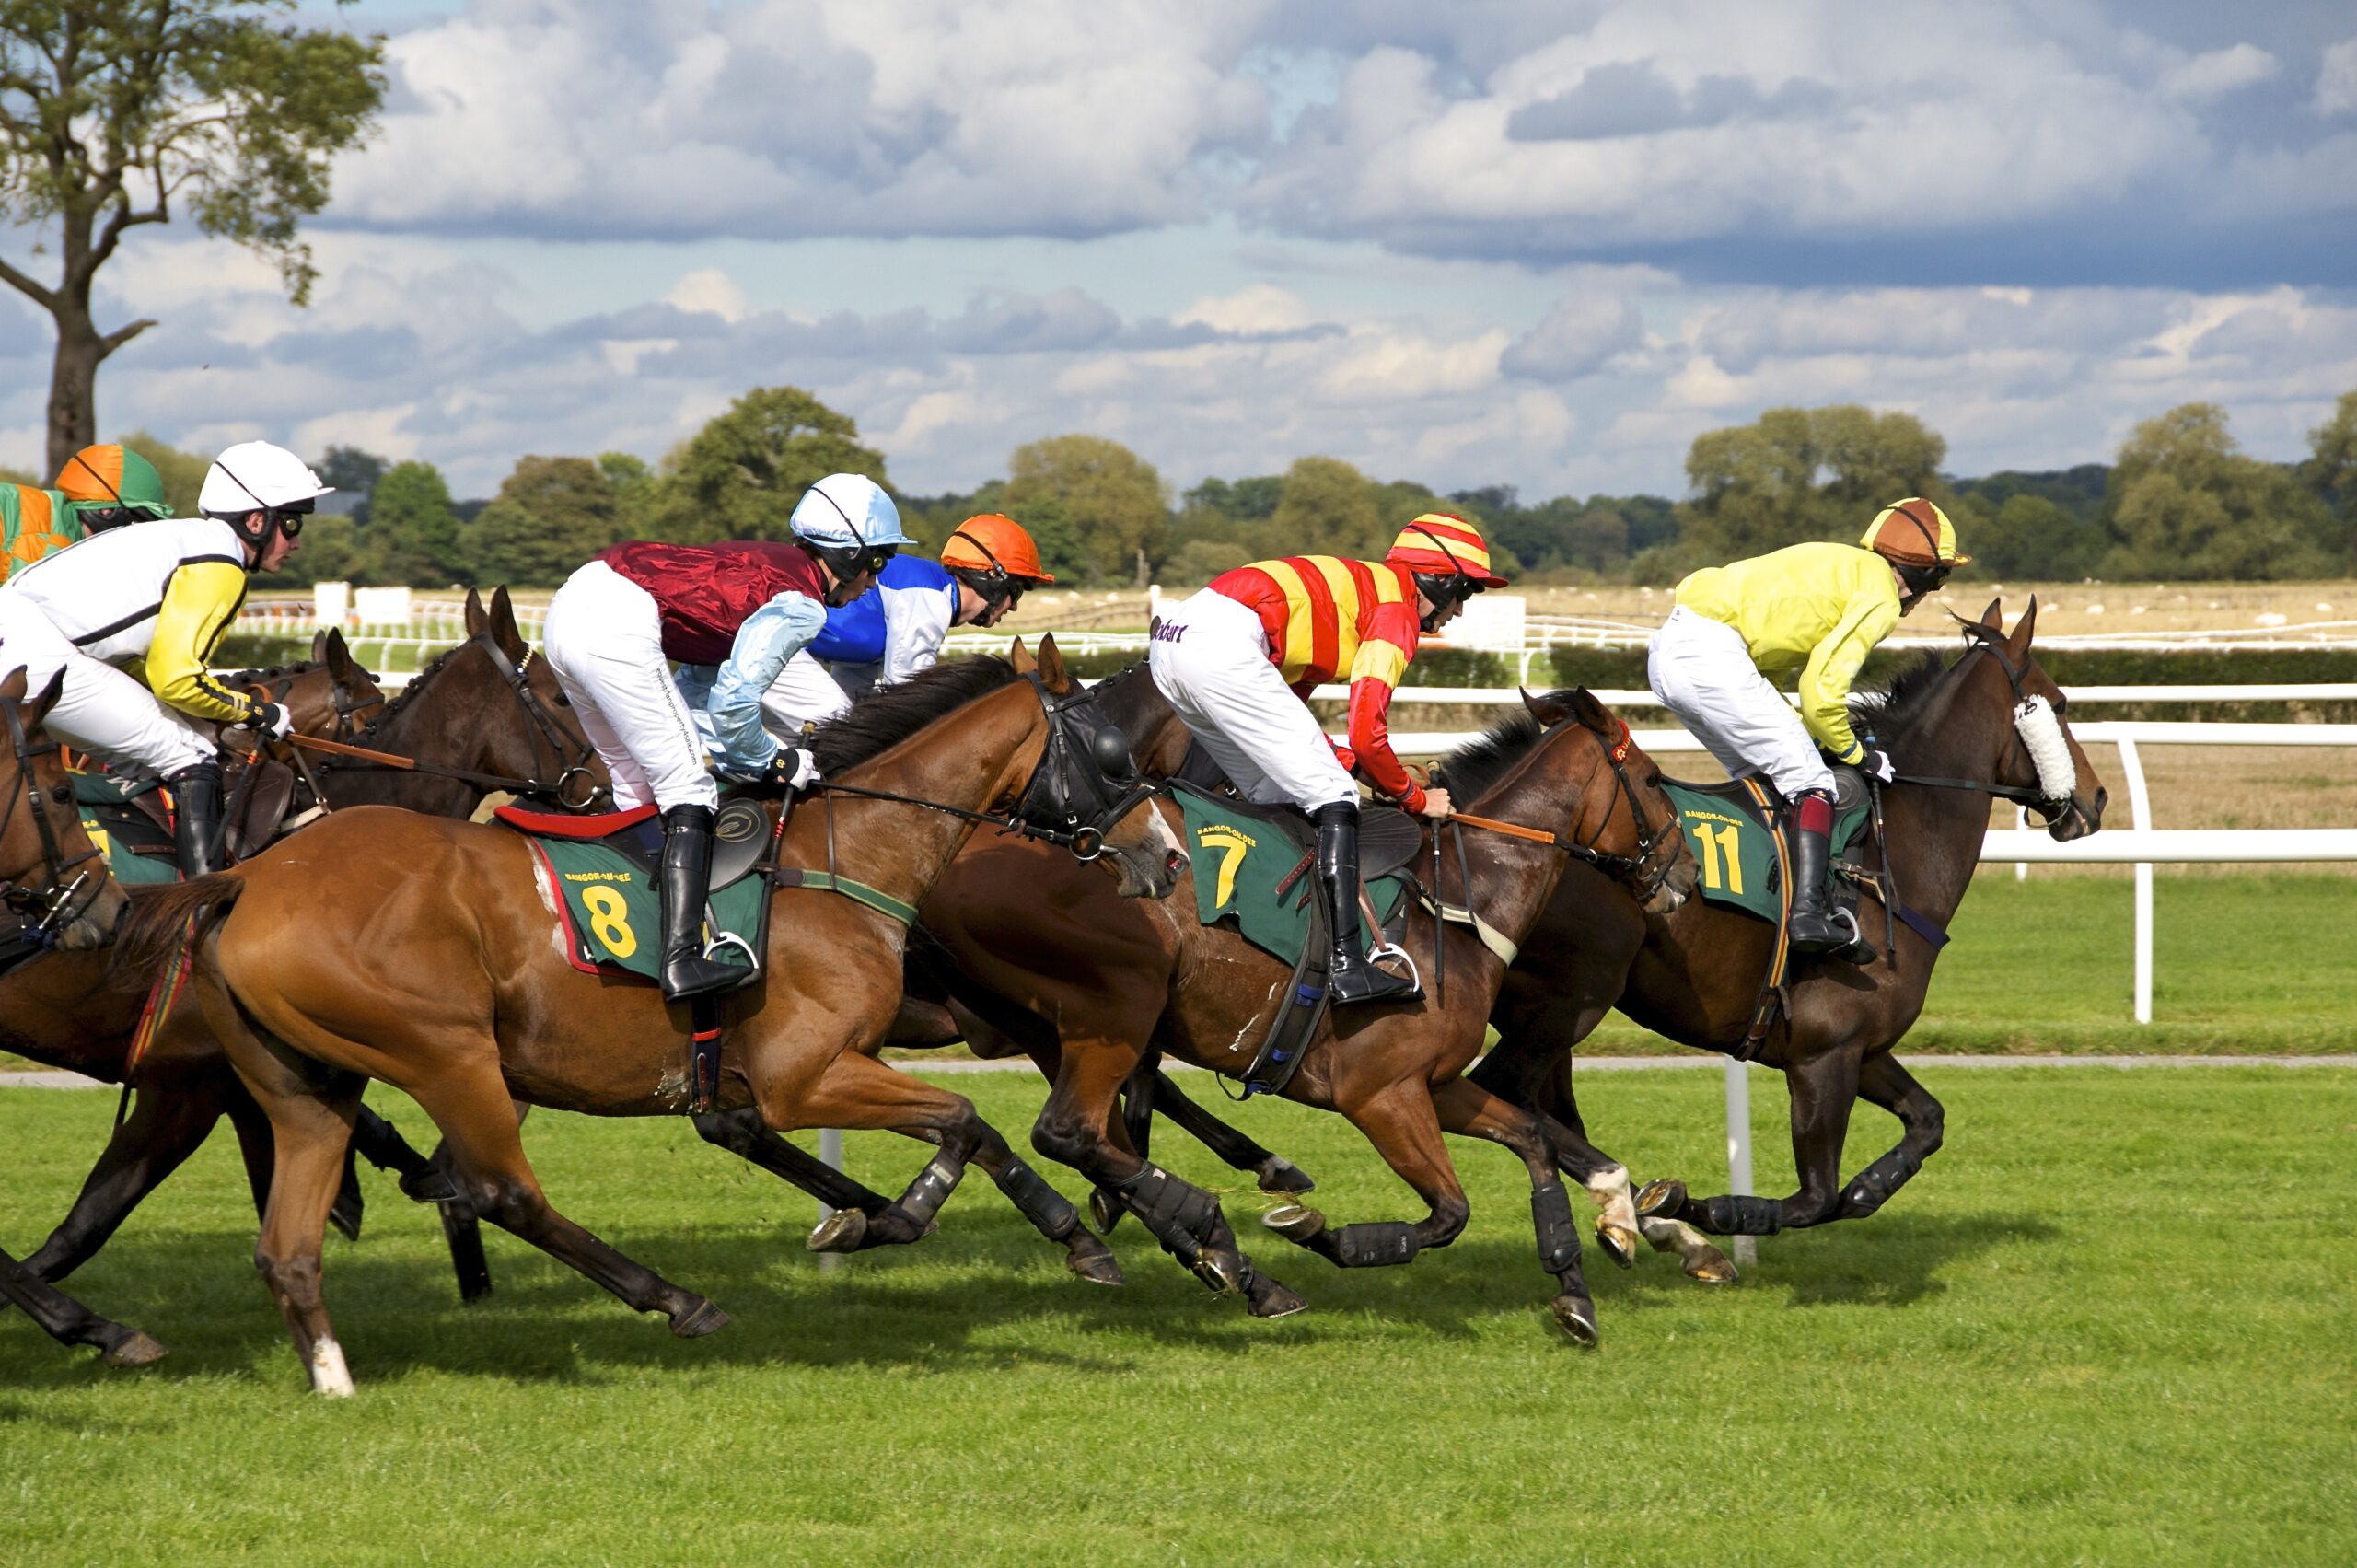 “A Punter’s Playbook: Effective Strategies for Horse Race Betting”